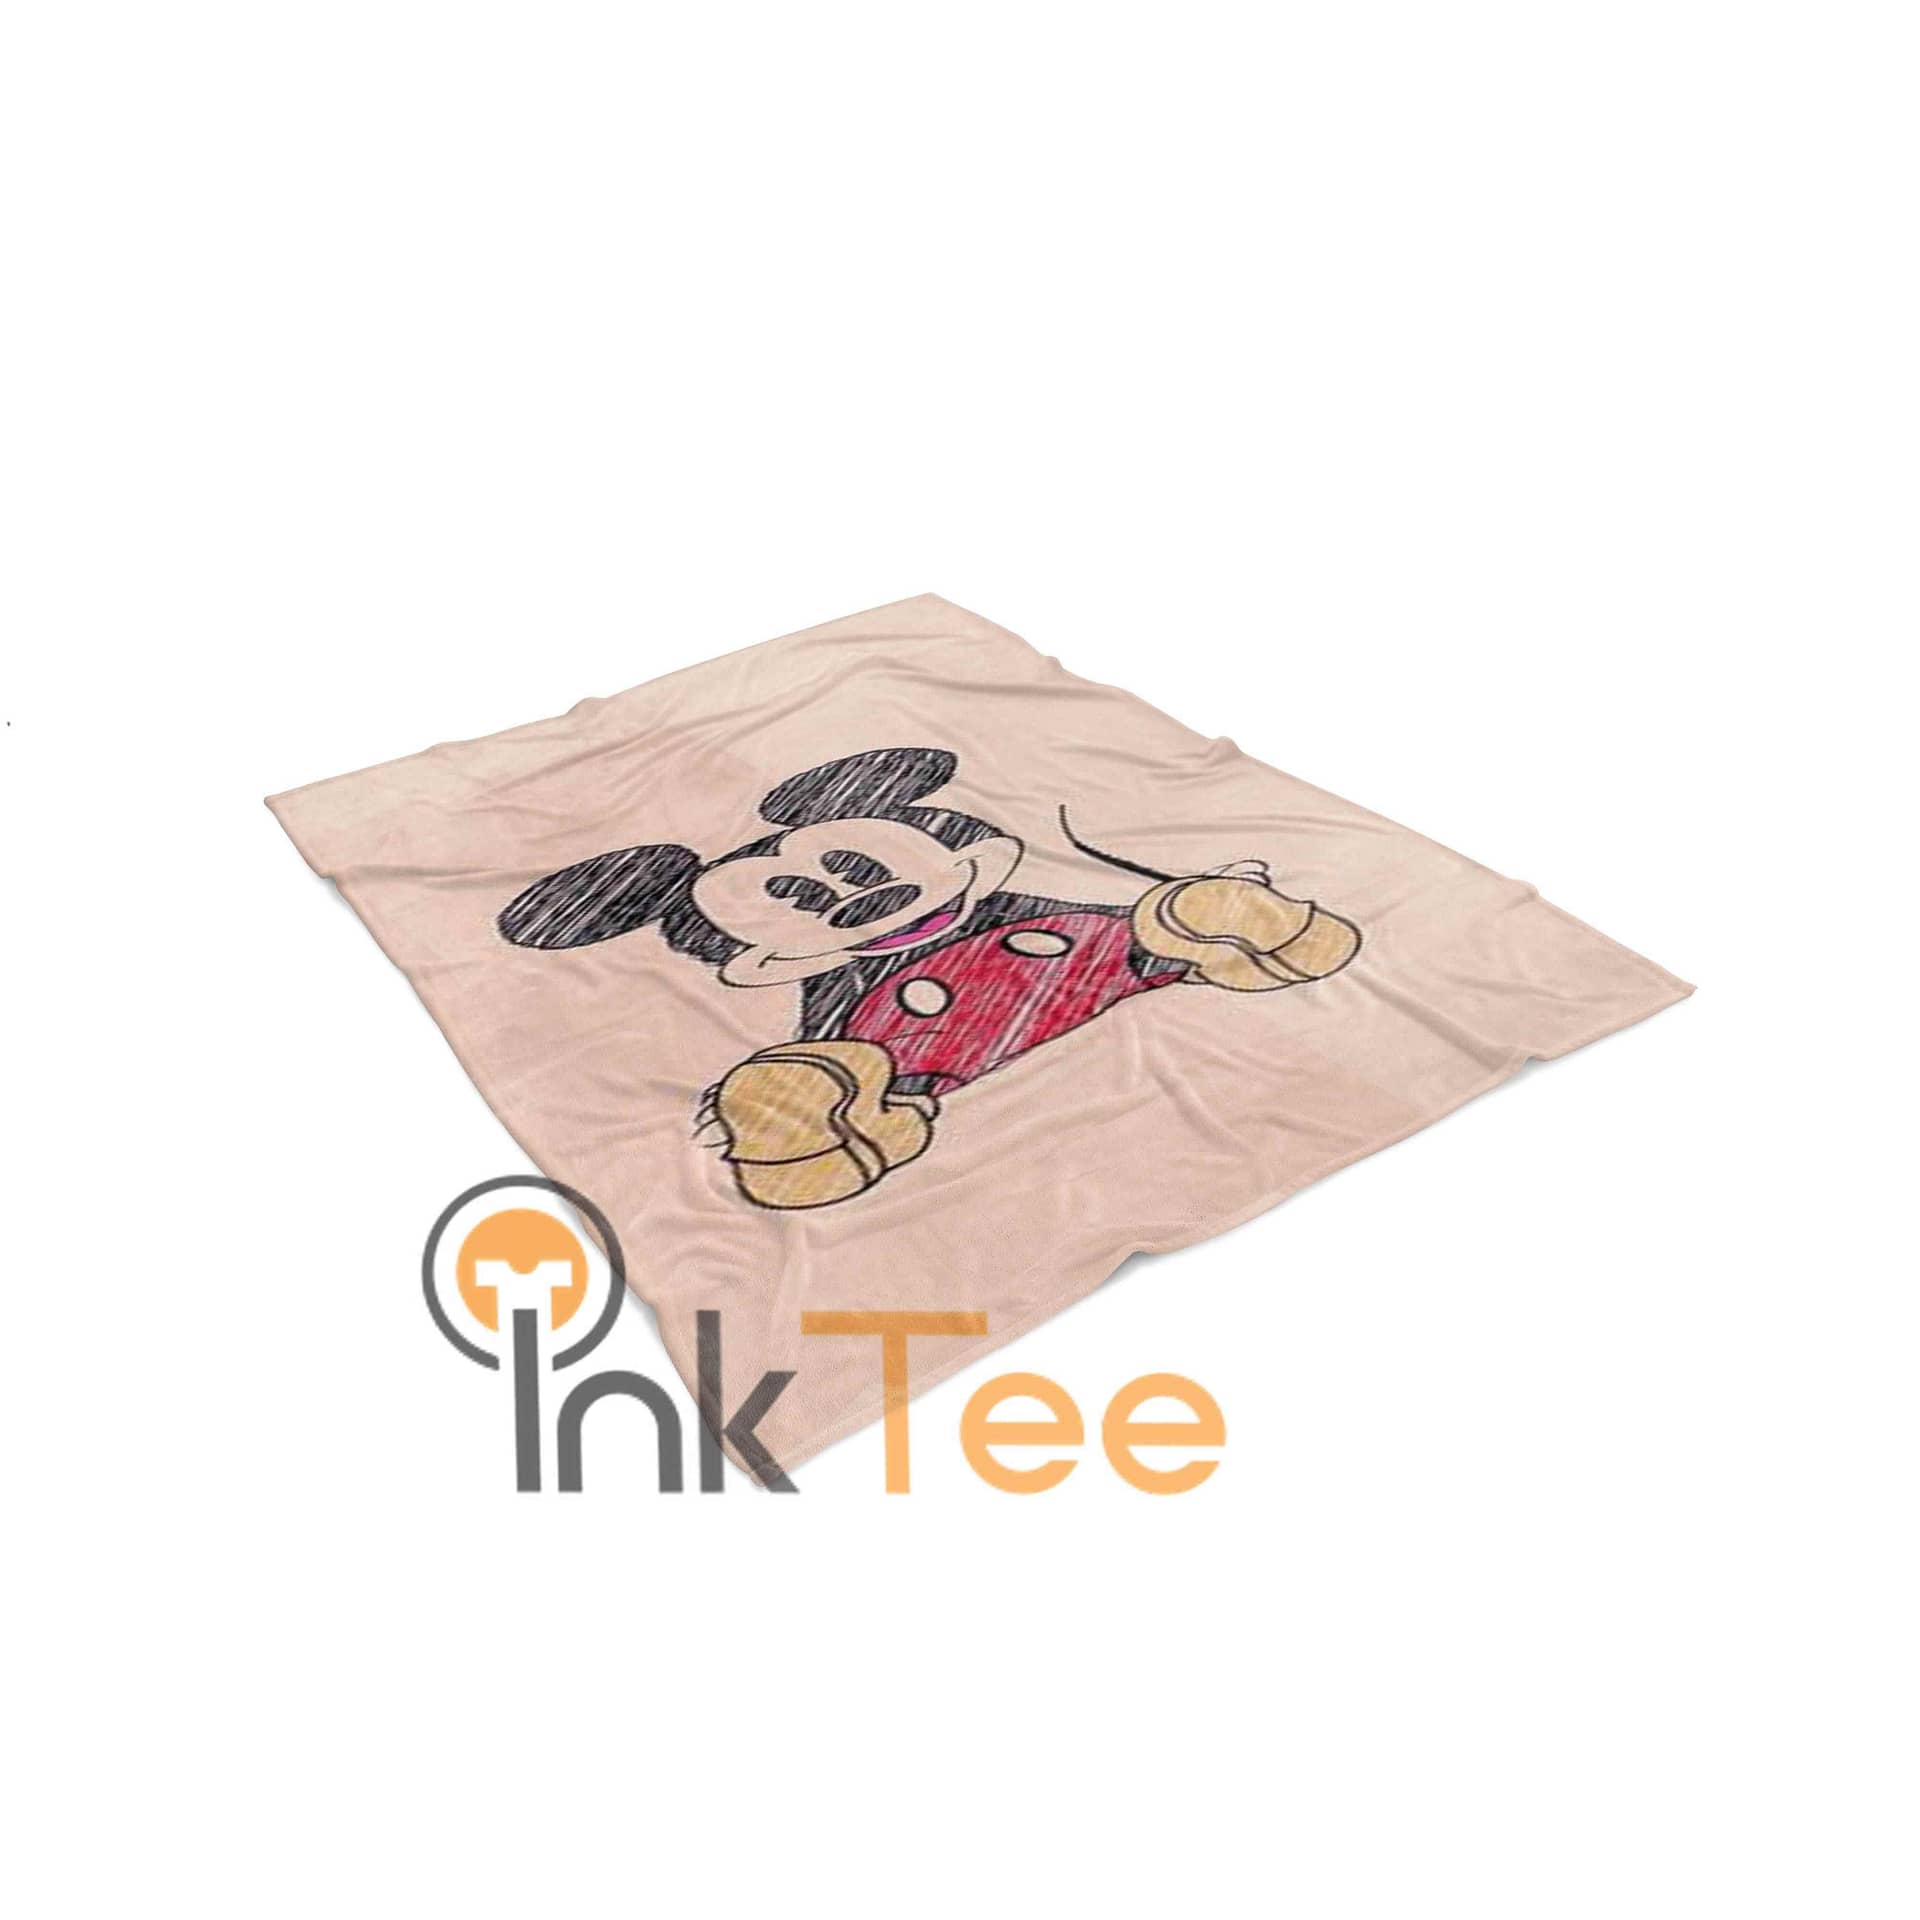 Inktee Store - Minnie Mouse Limited Edition Area Amazon Best Seller 4106 Fleece Blanket Image